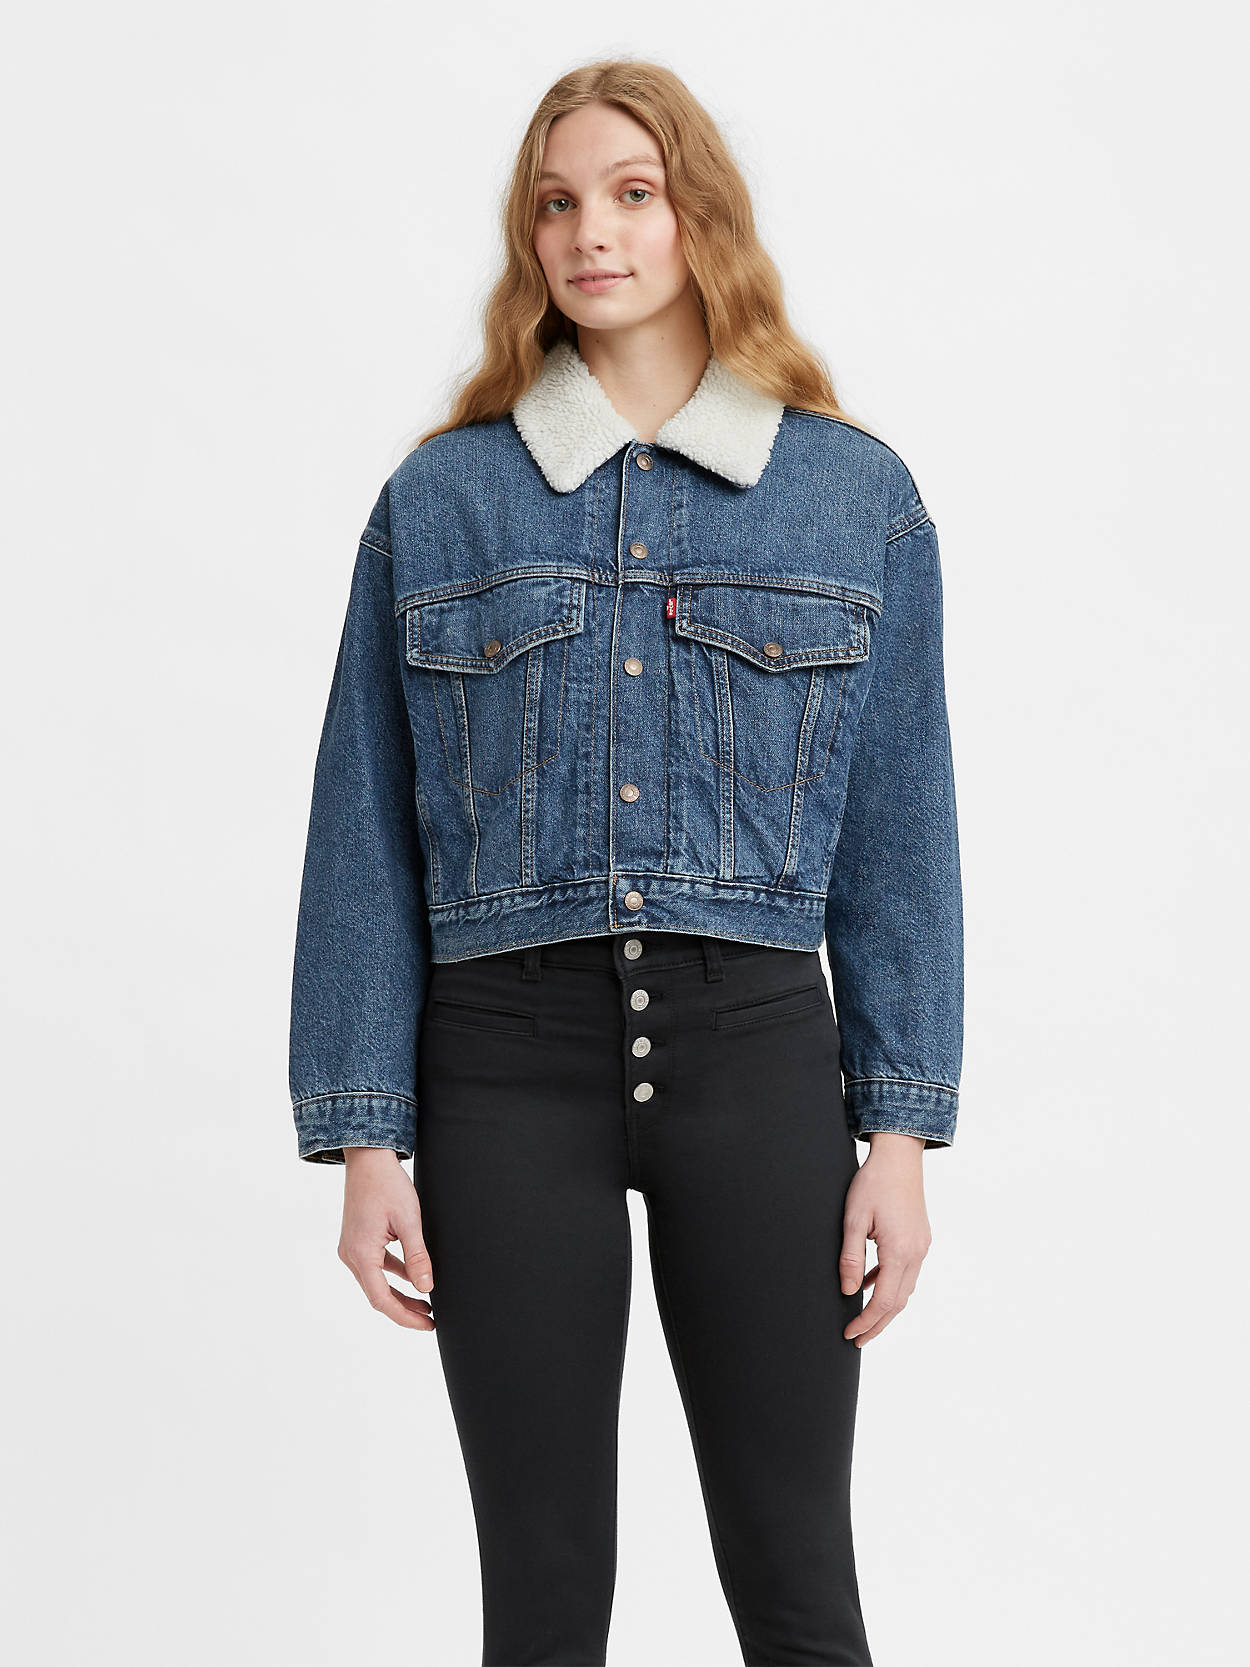 LEVI’S: Extra 50% Off Sale Styles